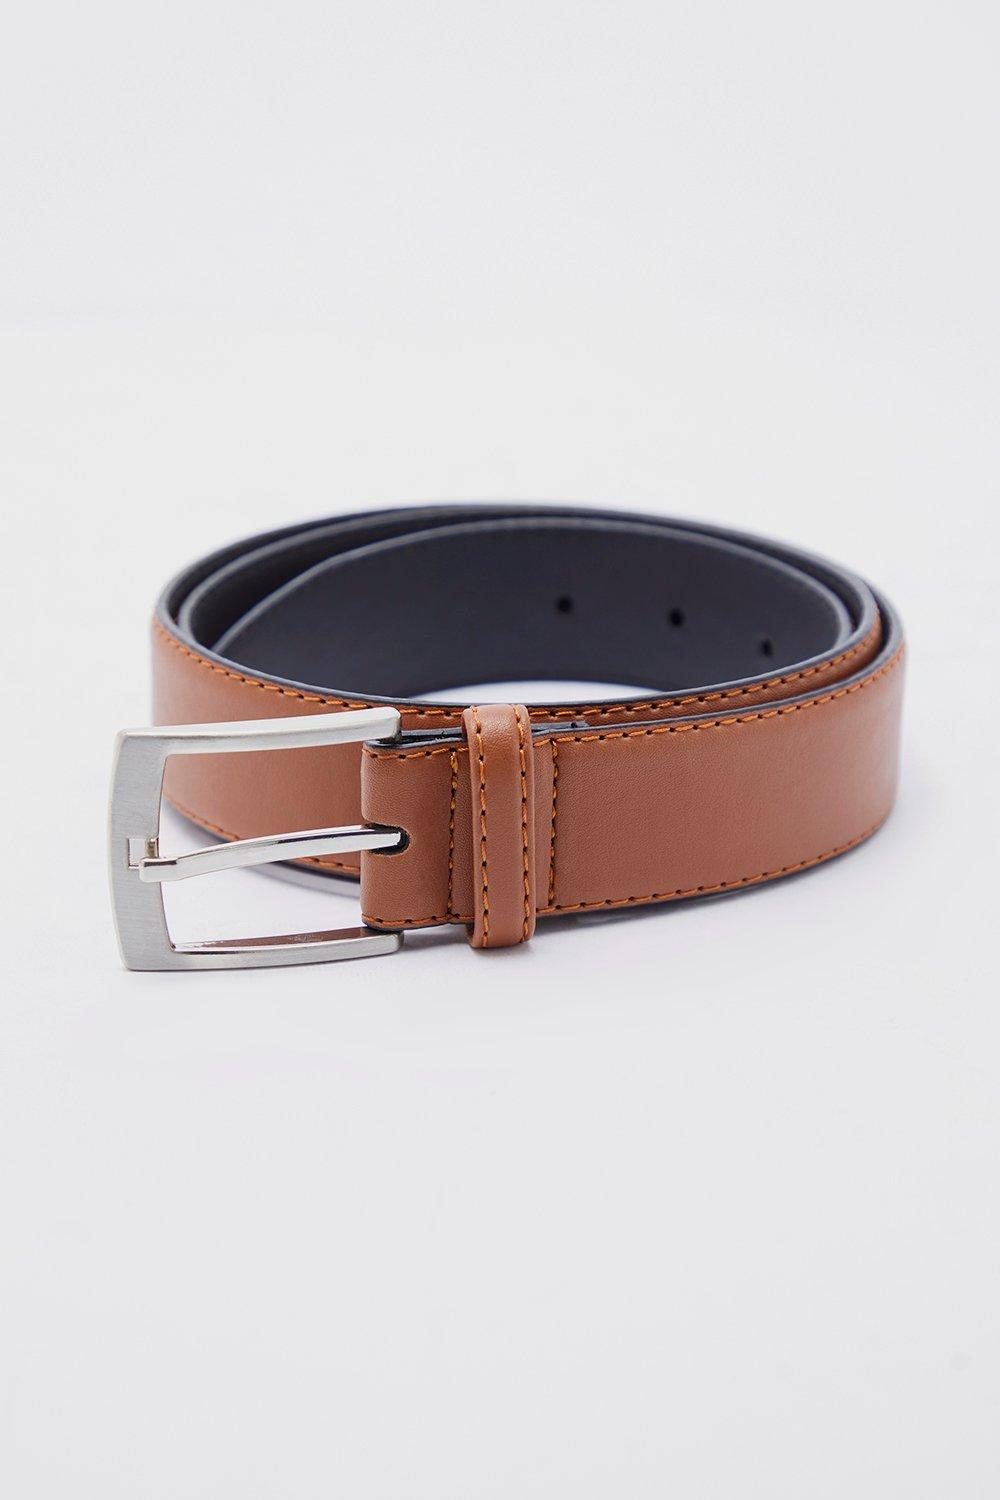 Boohoo Faux Leather Feather Edge Belt- Brown  - Size: XL